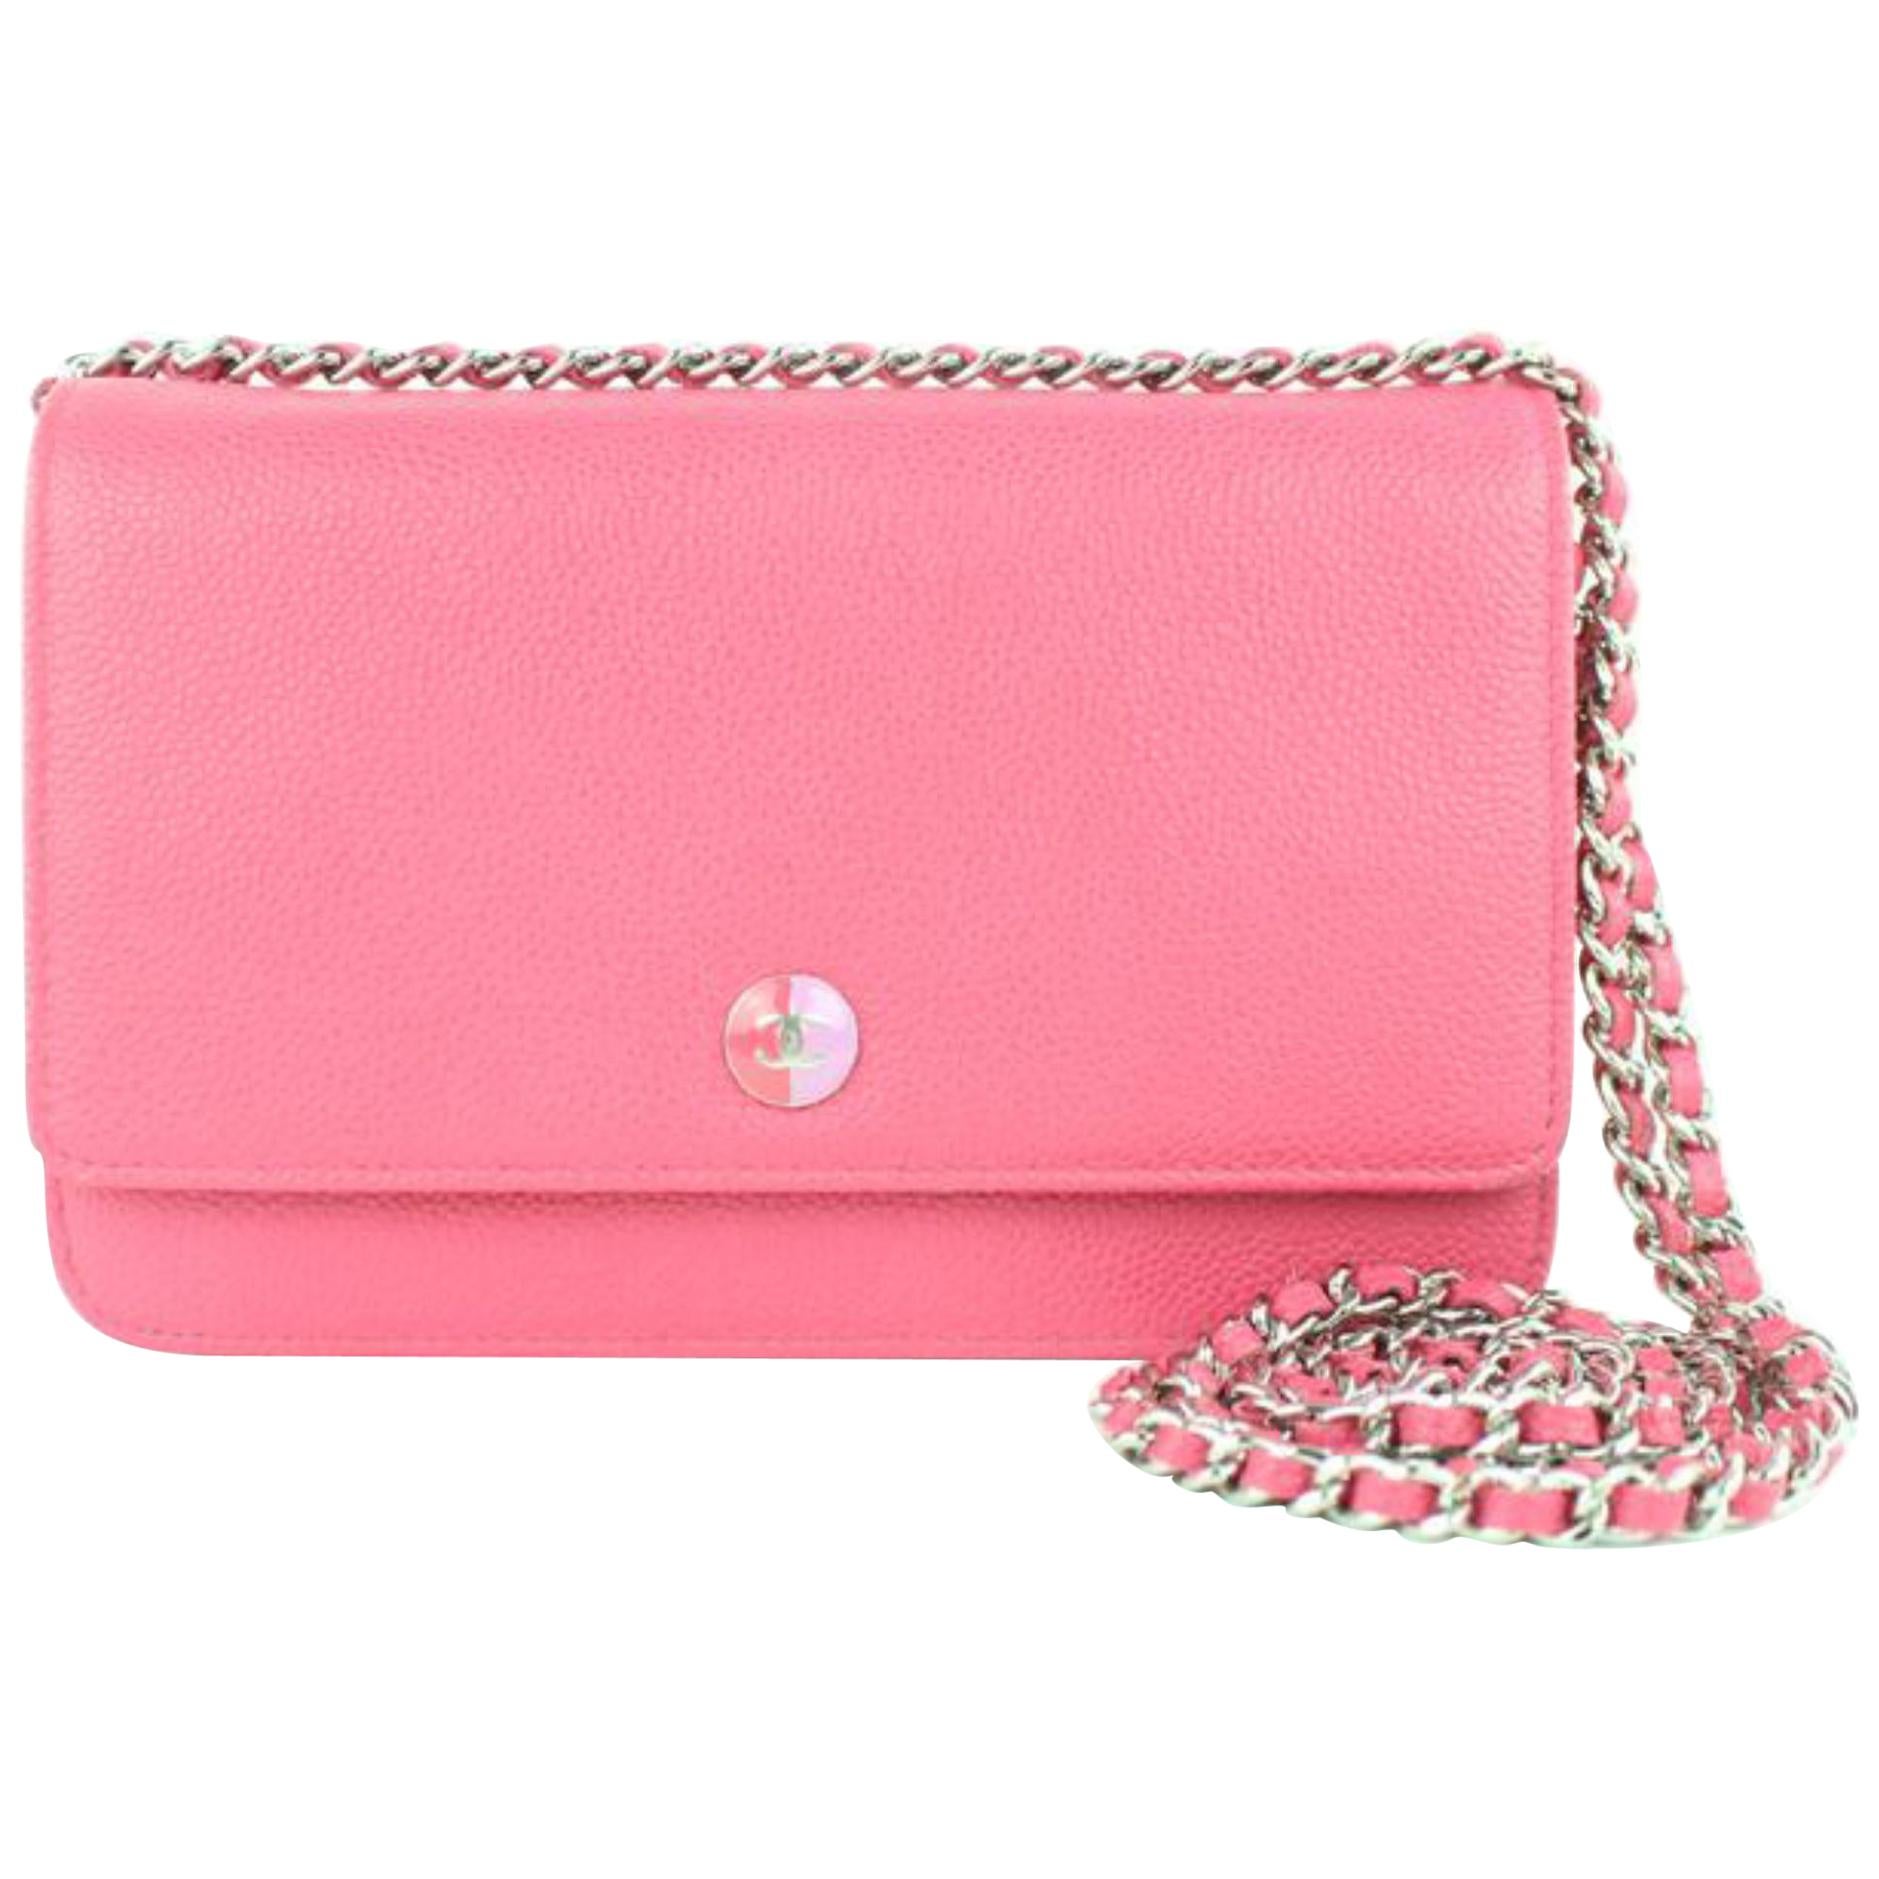 Chanel Wallet on Chain (Rare Edition) Cc Caviar 20cz1005 Pink Leather Cross Body For Sale